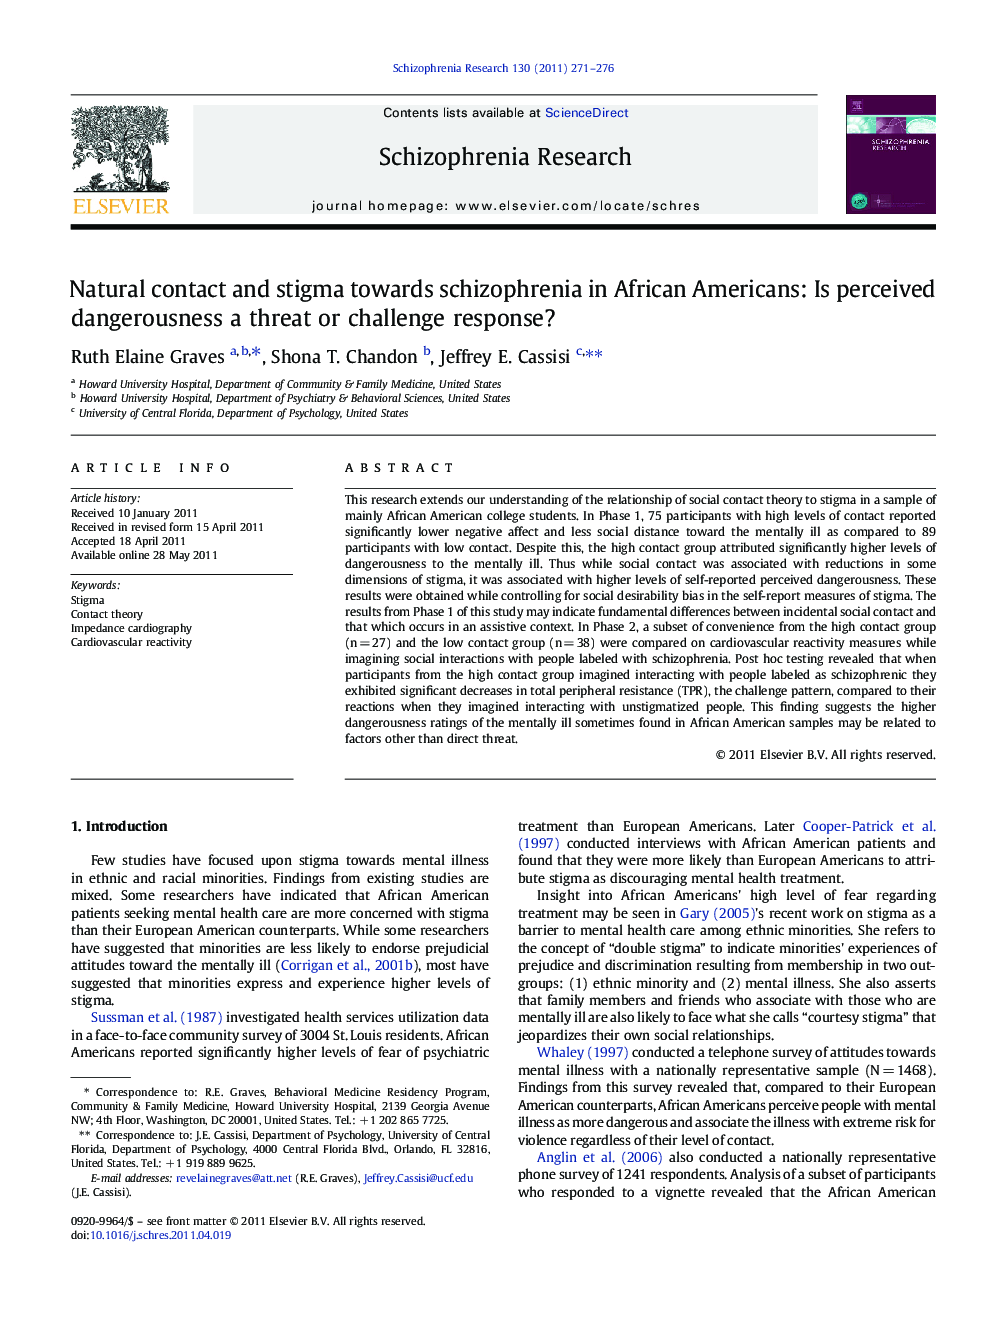 Natural contact and stigma towards schizophrenia in African Americans: Is perceived dangerousness a threat or challenge response?